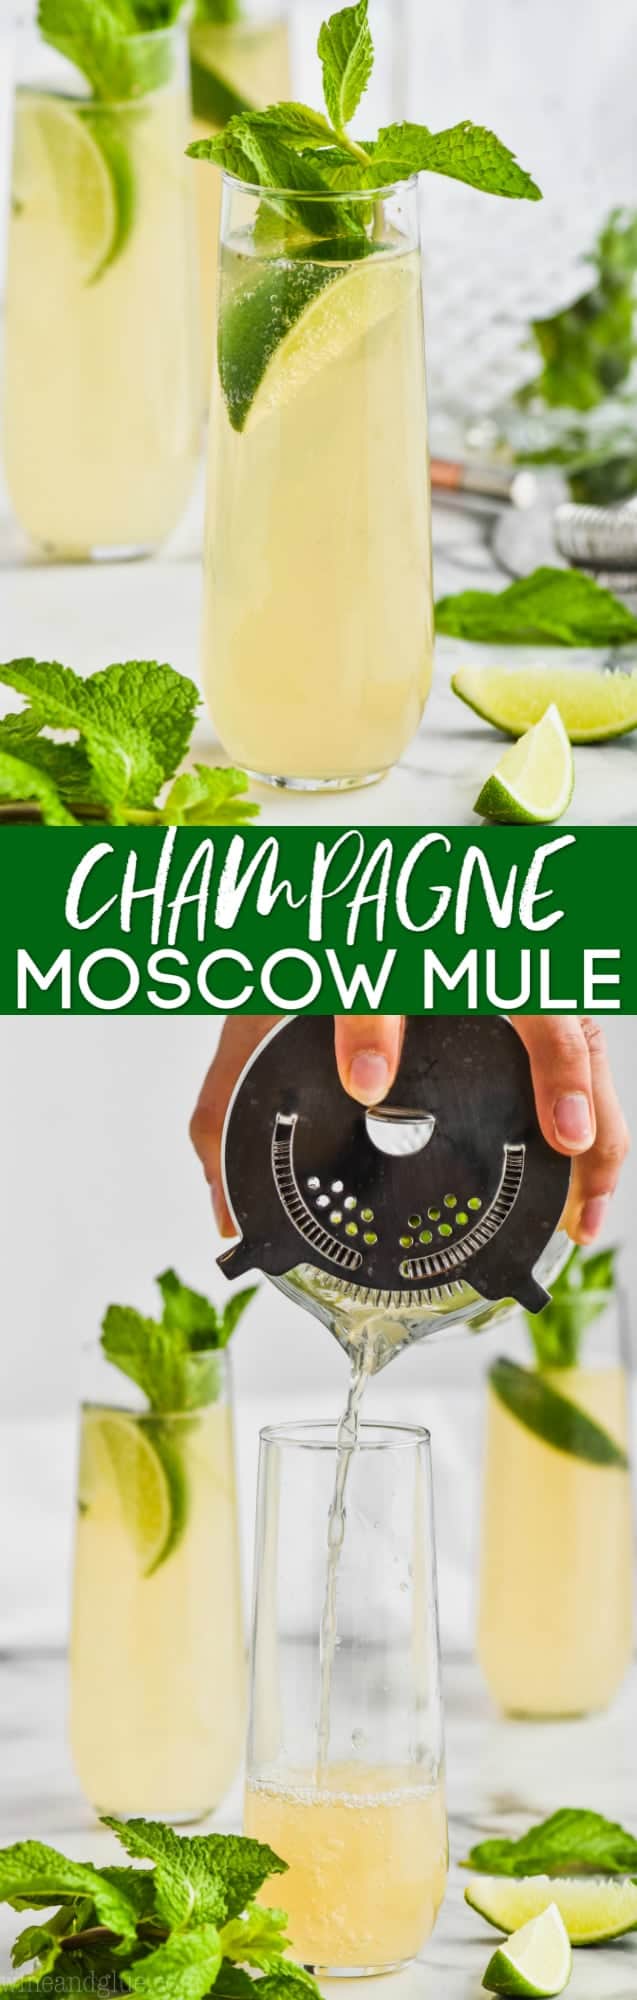 collage of photos of champagne moscow mule